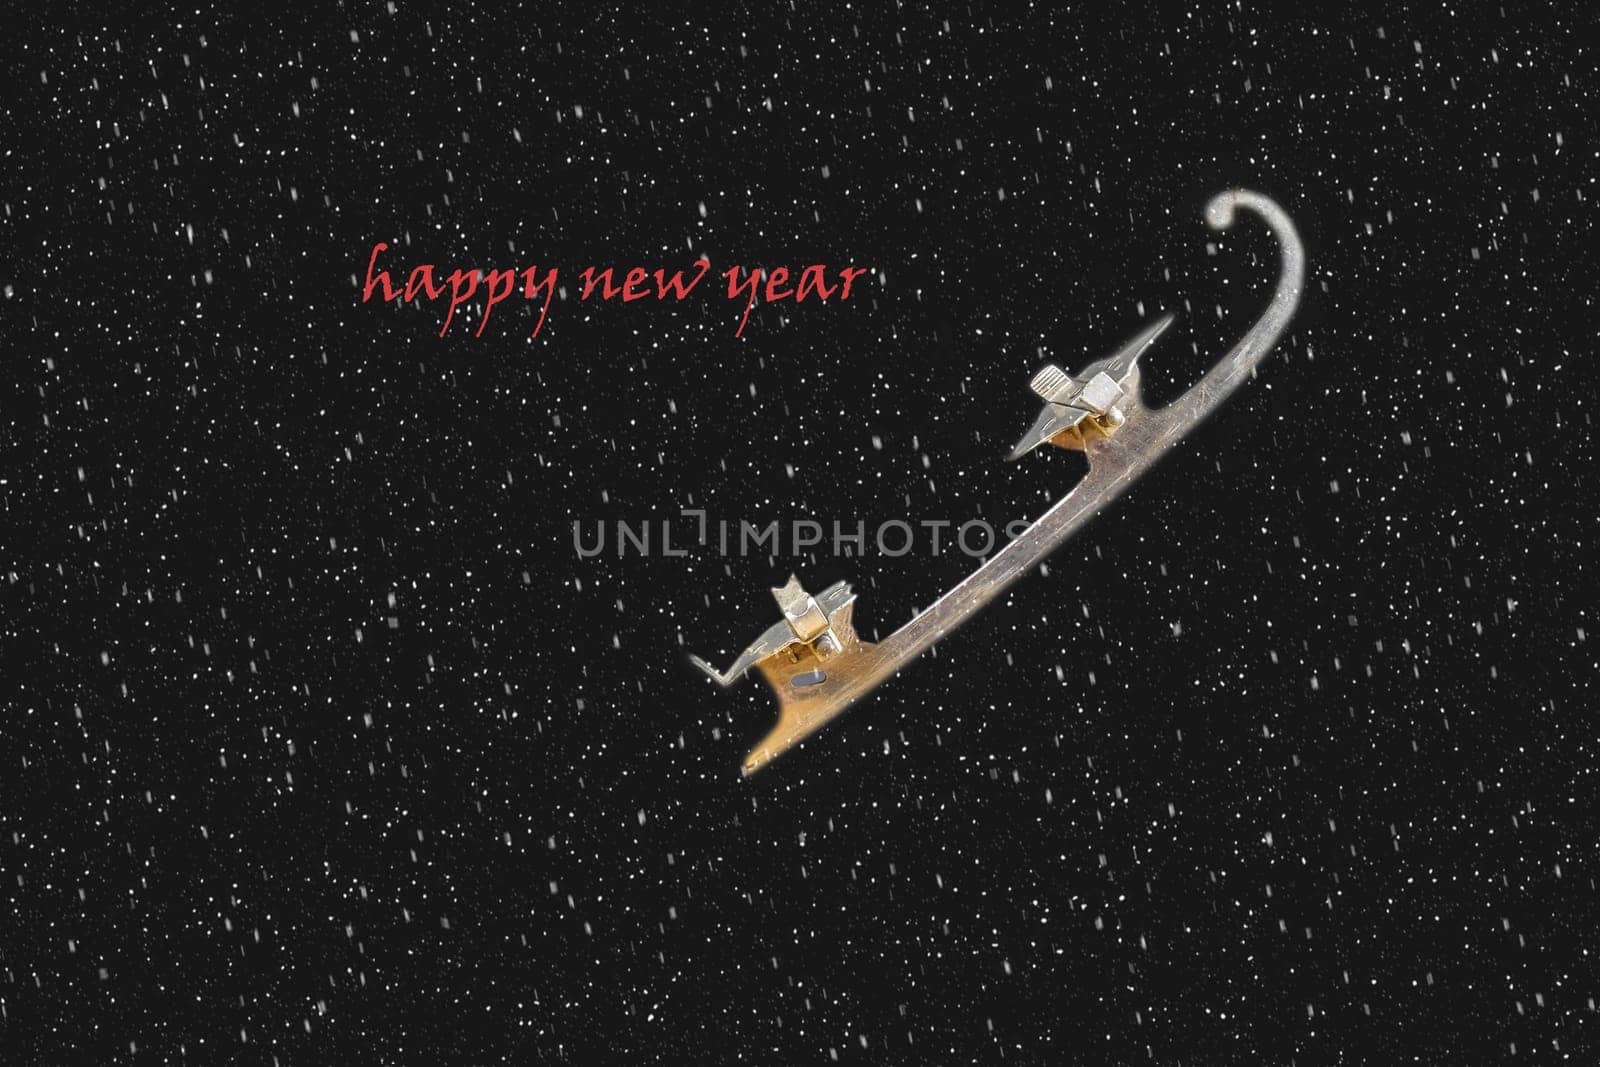 Vintage ice-skate on black background with snow effect. Text - Happy New Year. Copy space.